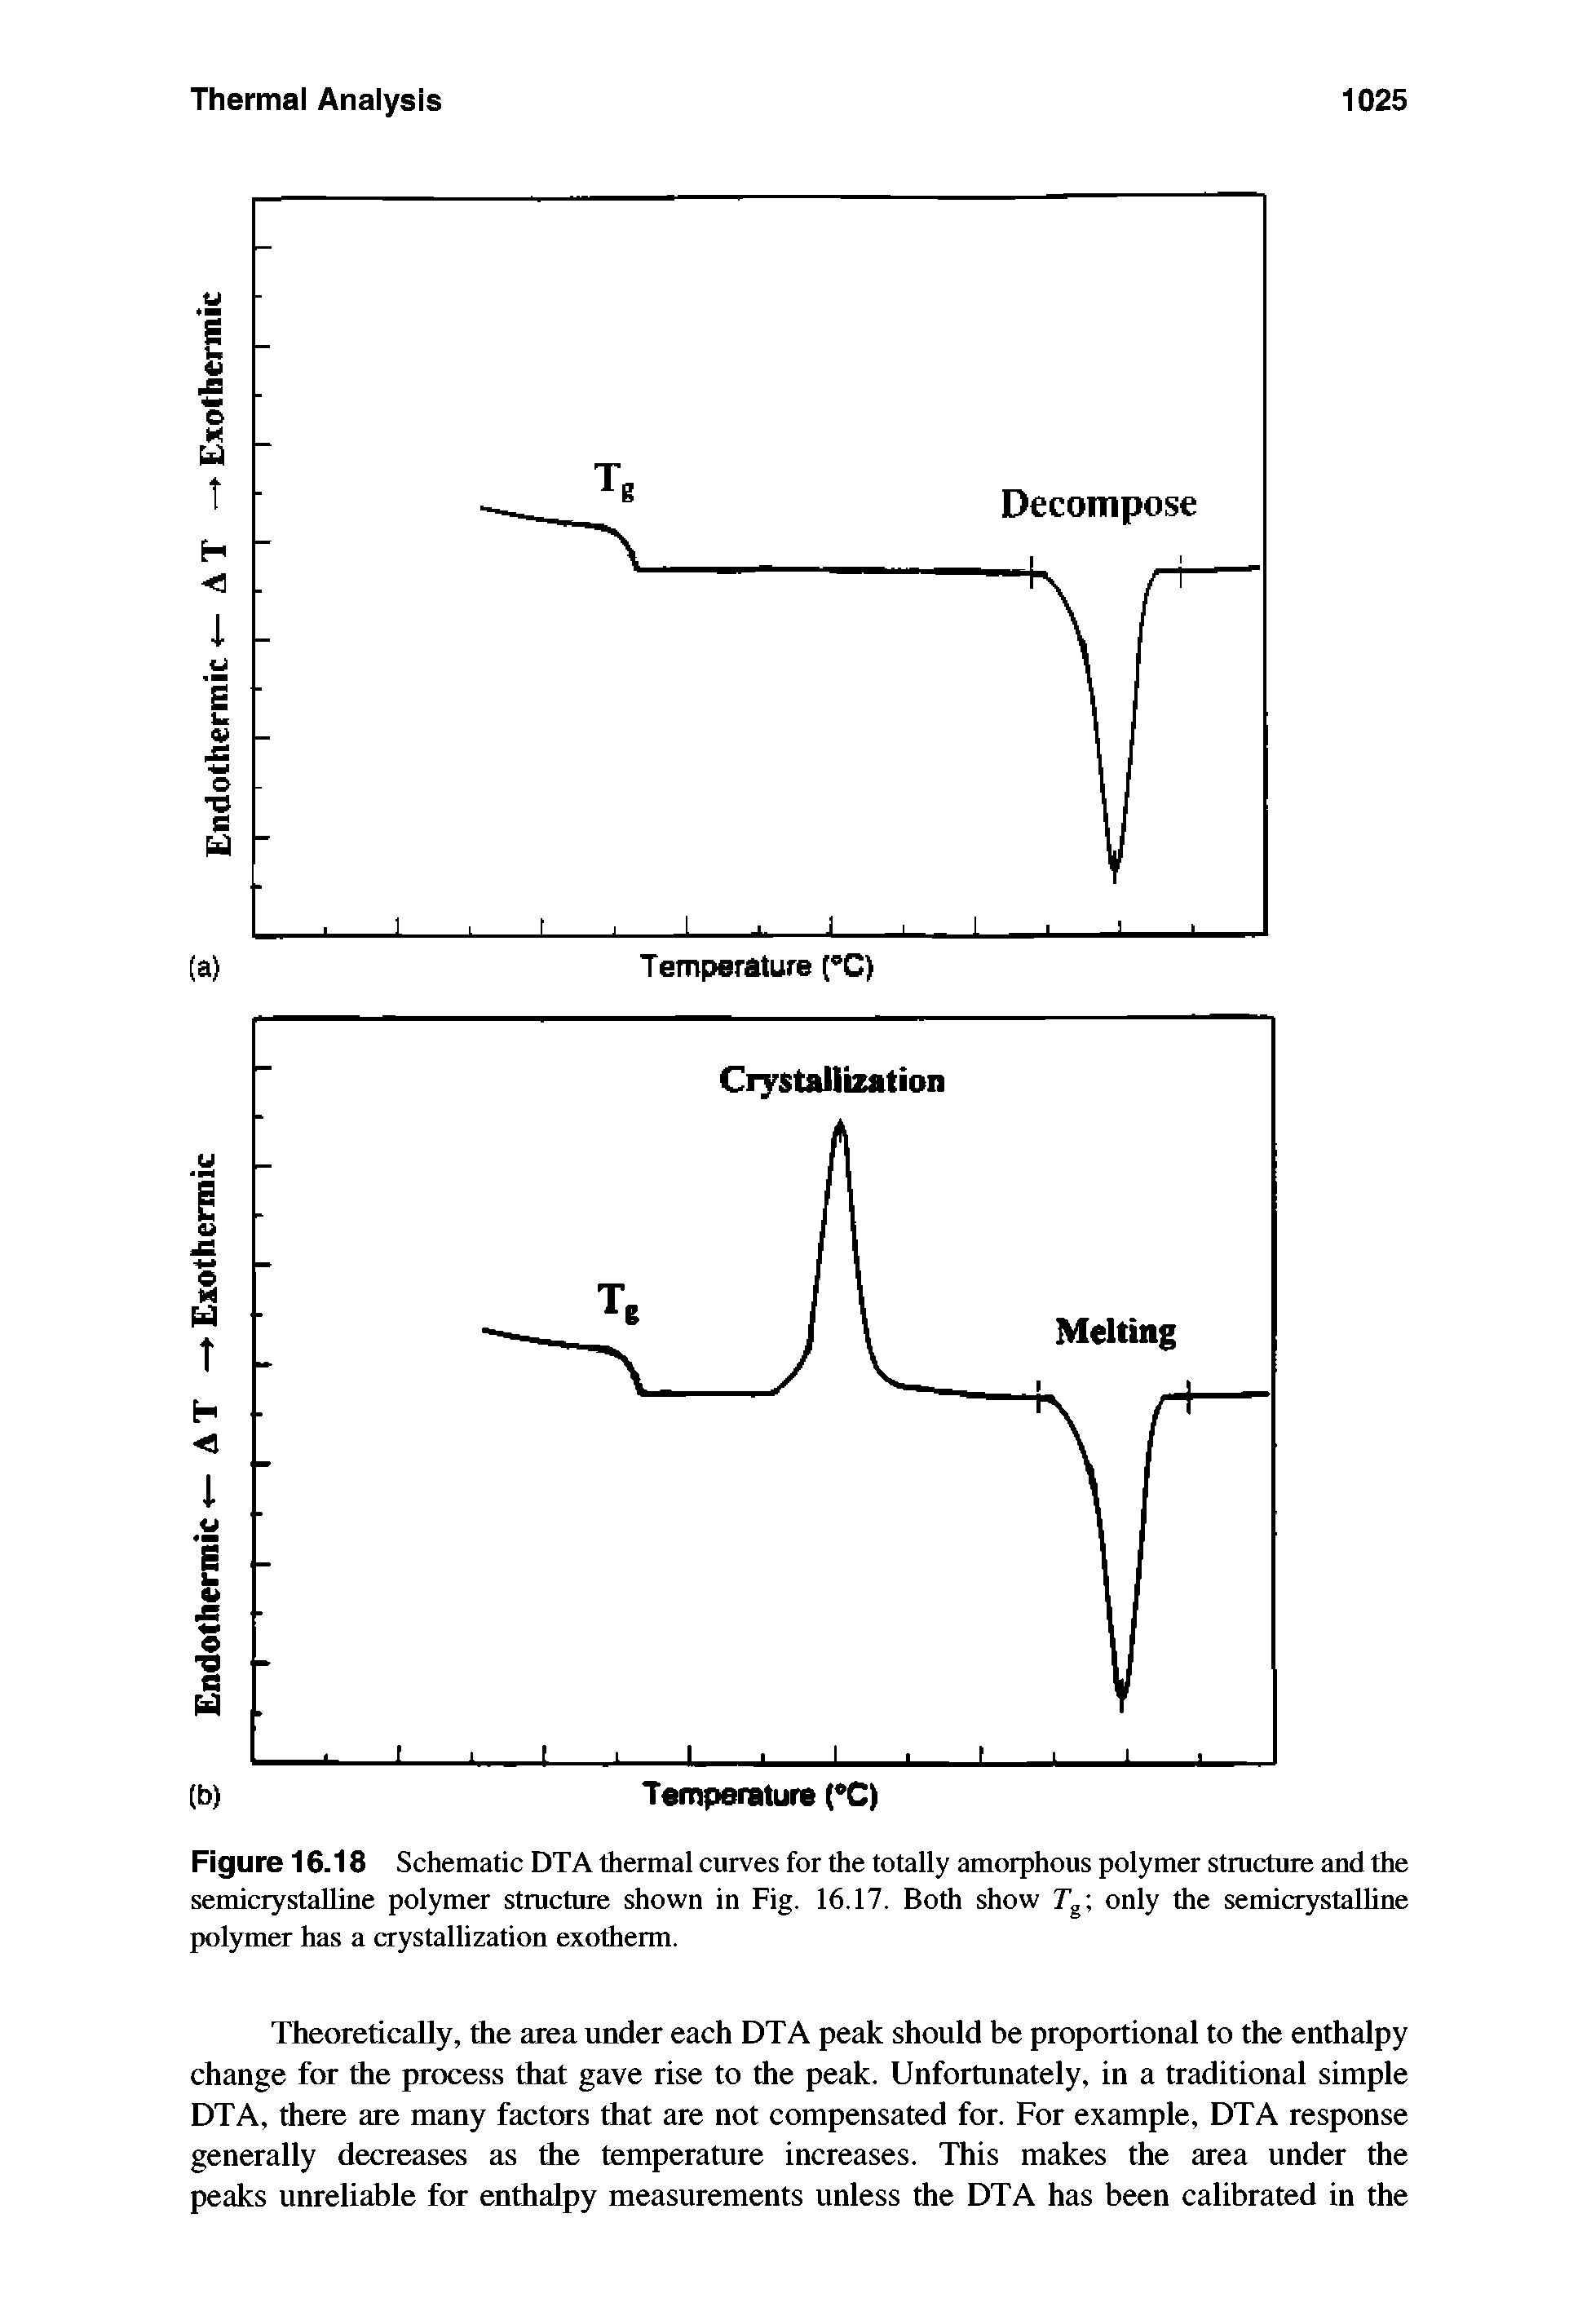 Figure 16.18 Schematic DTA thermal curves for the totally amorphous polymer structure and the semicrystalline polymer structure shown in Fig. 16.17. Both show only the semicrystalhne polymer has a crystallization exotherm.